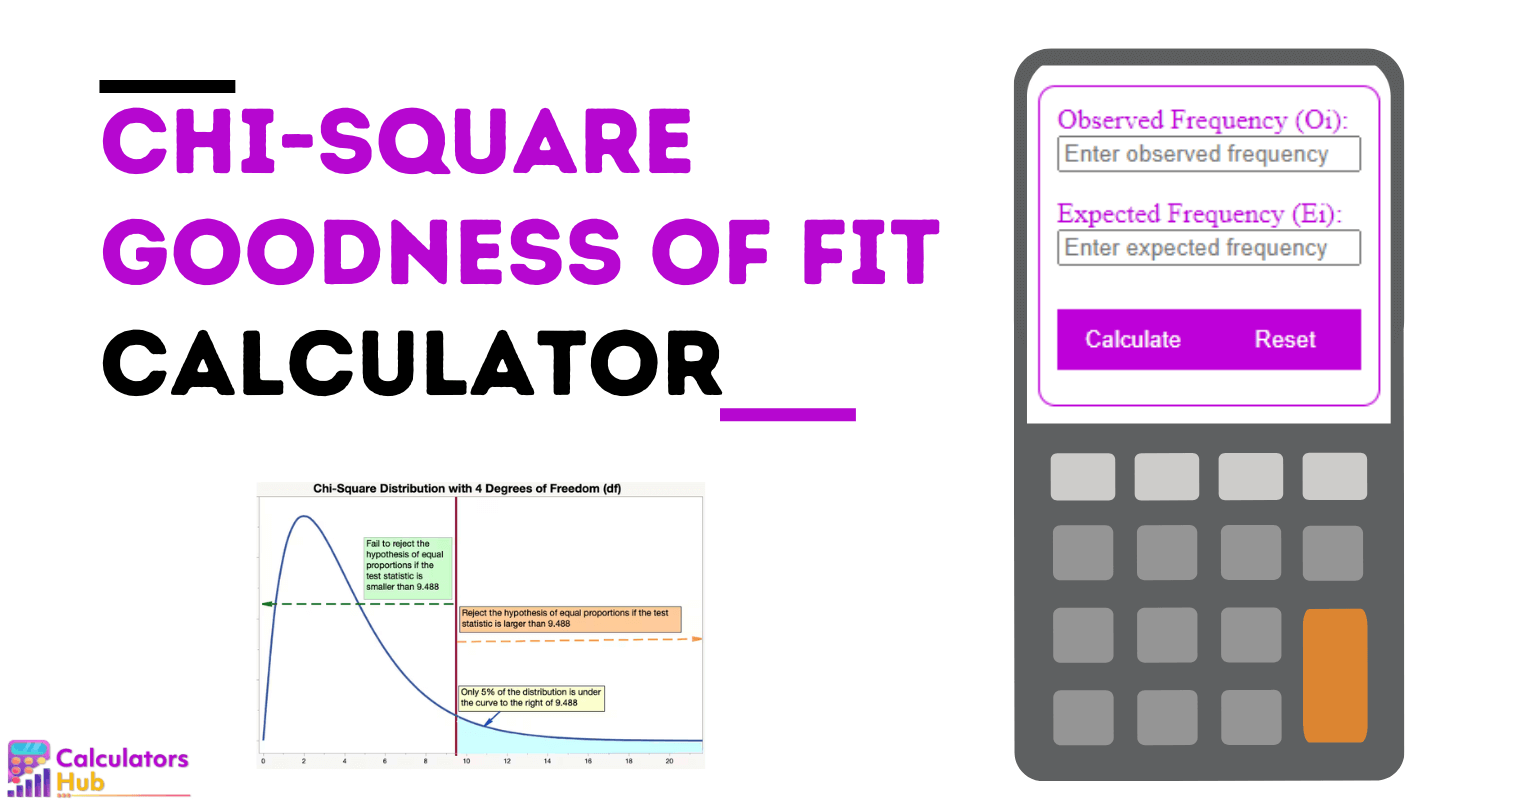 Chi-square Goodness of Fit Calculator